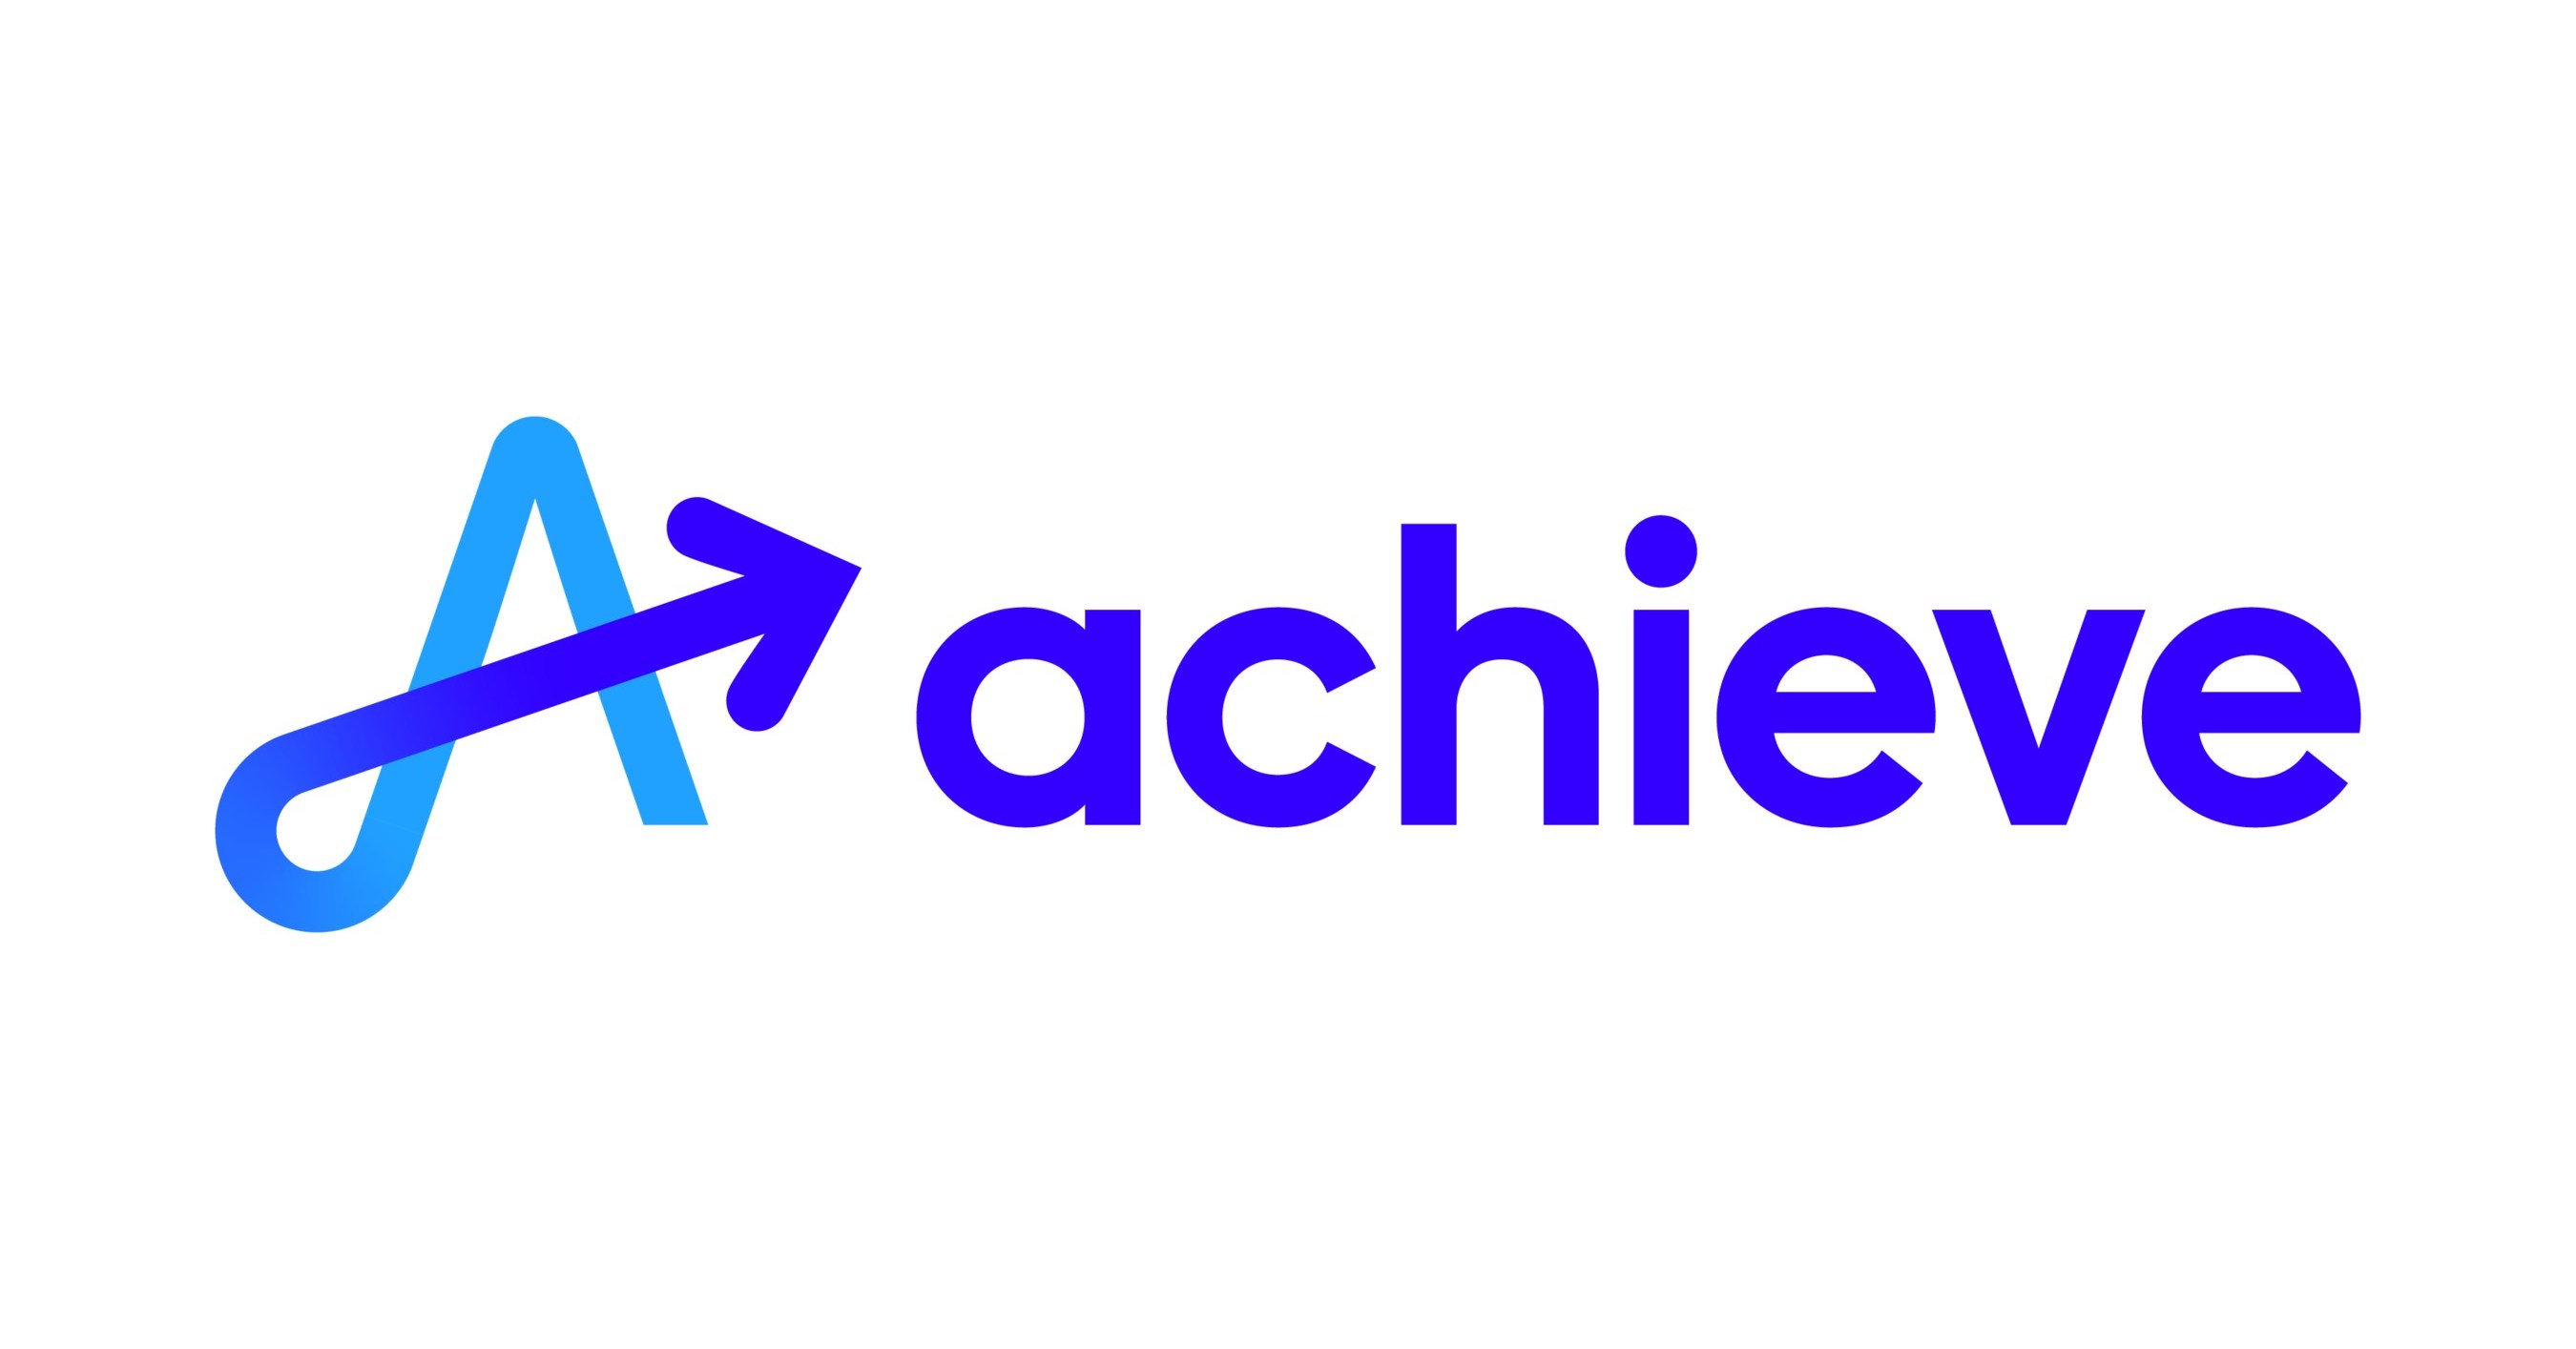 Meet Achieve, the Leader in Digital Personal Finance Built for Everyday People